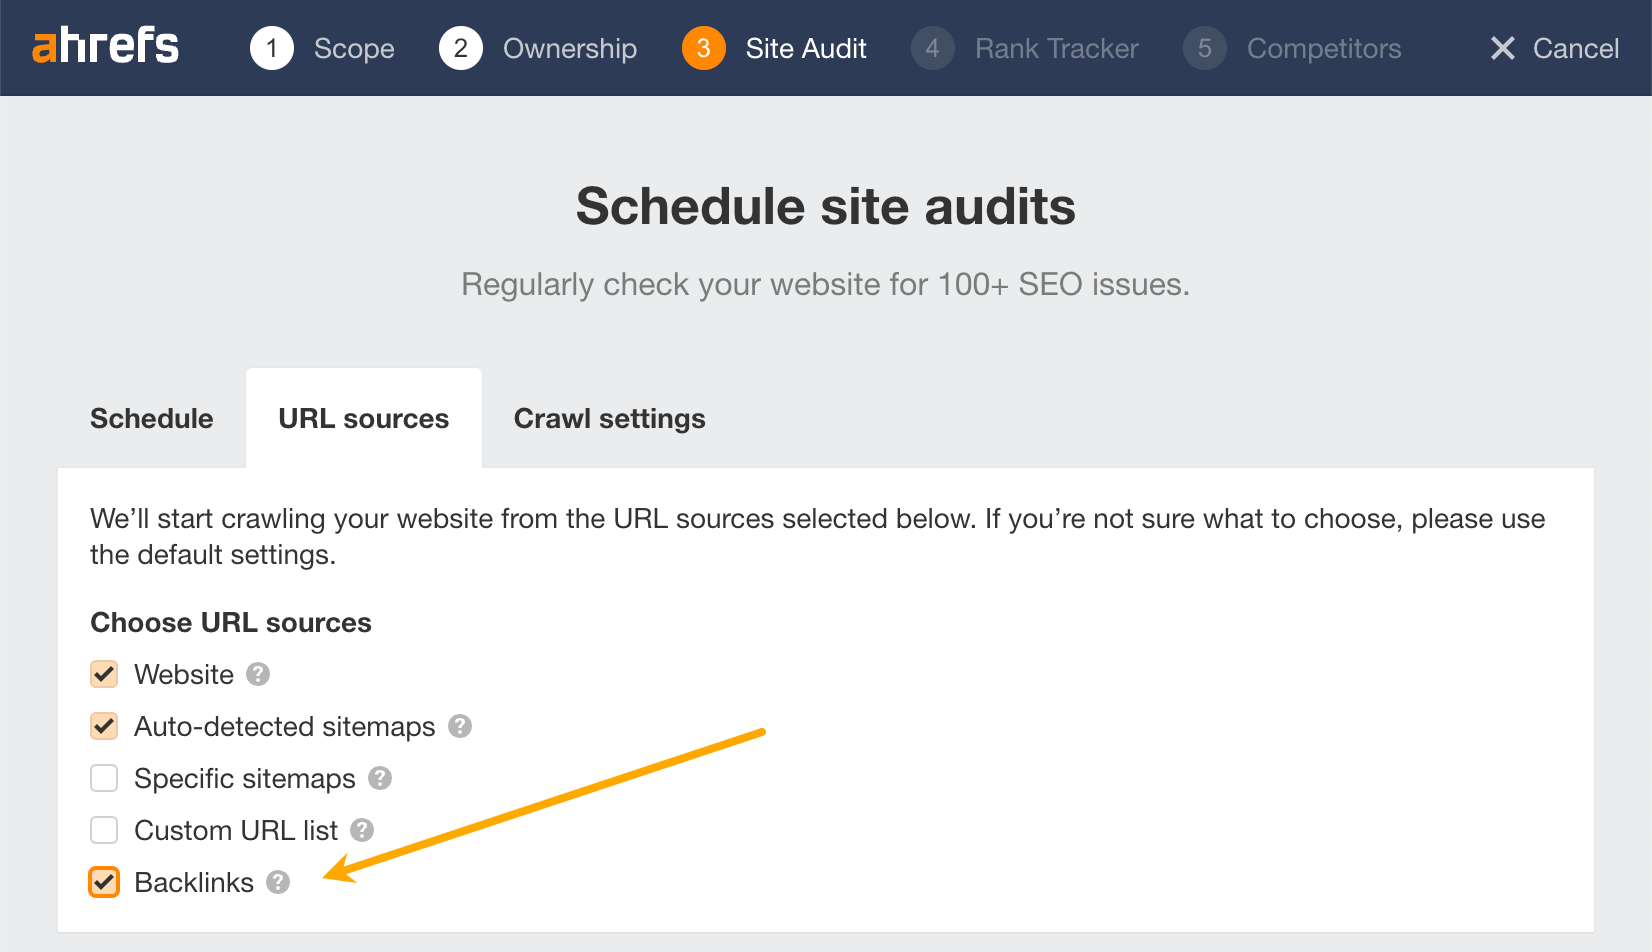 How to turn on the backlinks option under "Crawl settings" in Ahrefs' Site Audit